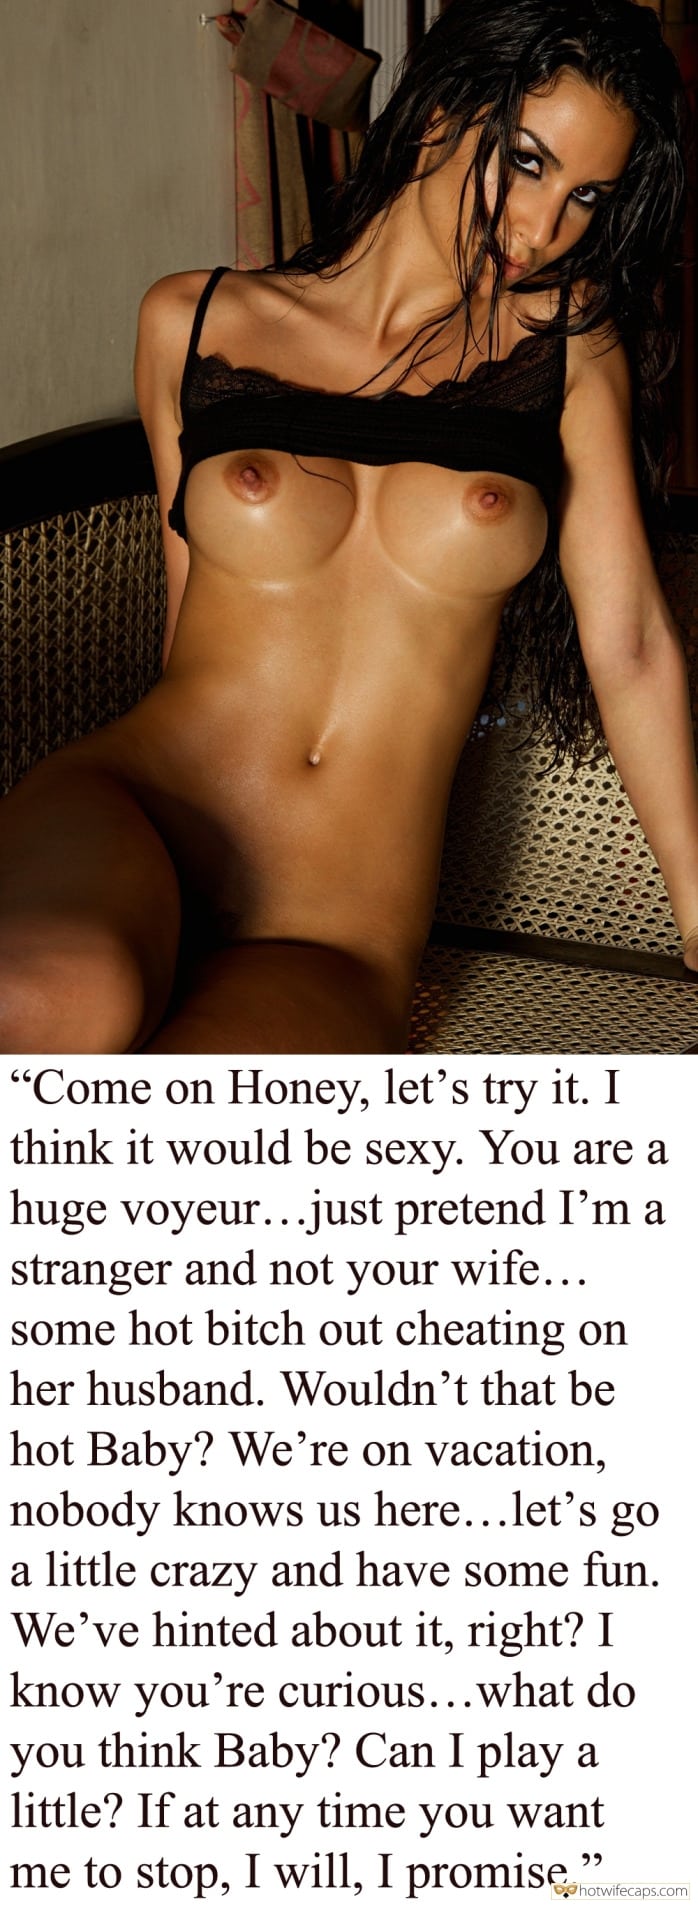 Vacation Dirty Talk hotwife caption: “Come on Honey, let’s try it. I think it would be sexy. You are a huge voyeur… just pretend I’m a stranger and not your wife… some hot bitch out cheating on her husband. Wouldn’t that be hot Baby? We’re...